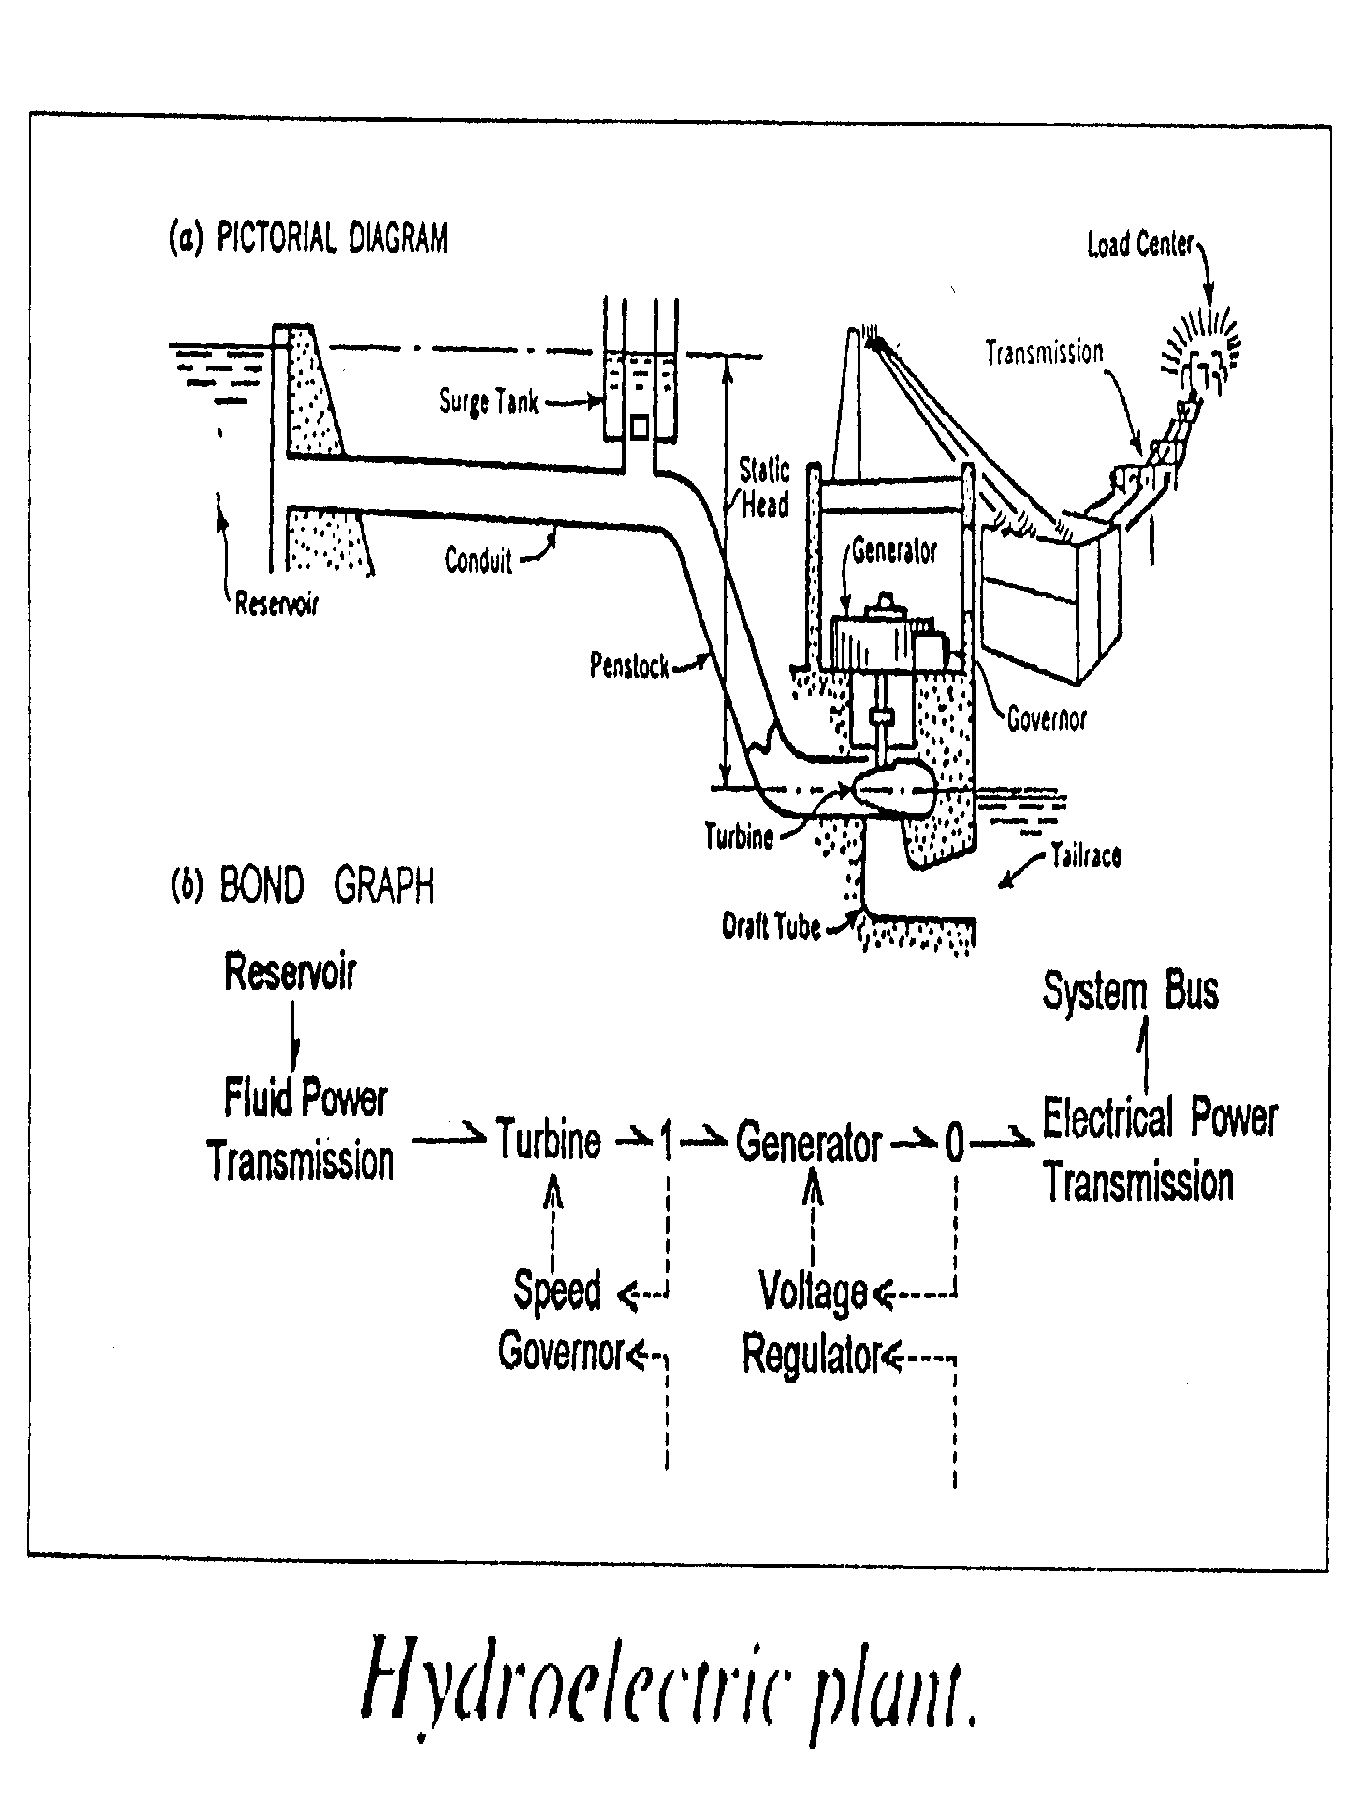 Paynter's bond graph of a hydroelectric plant